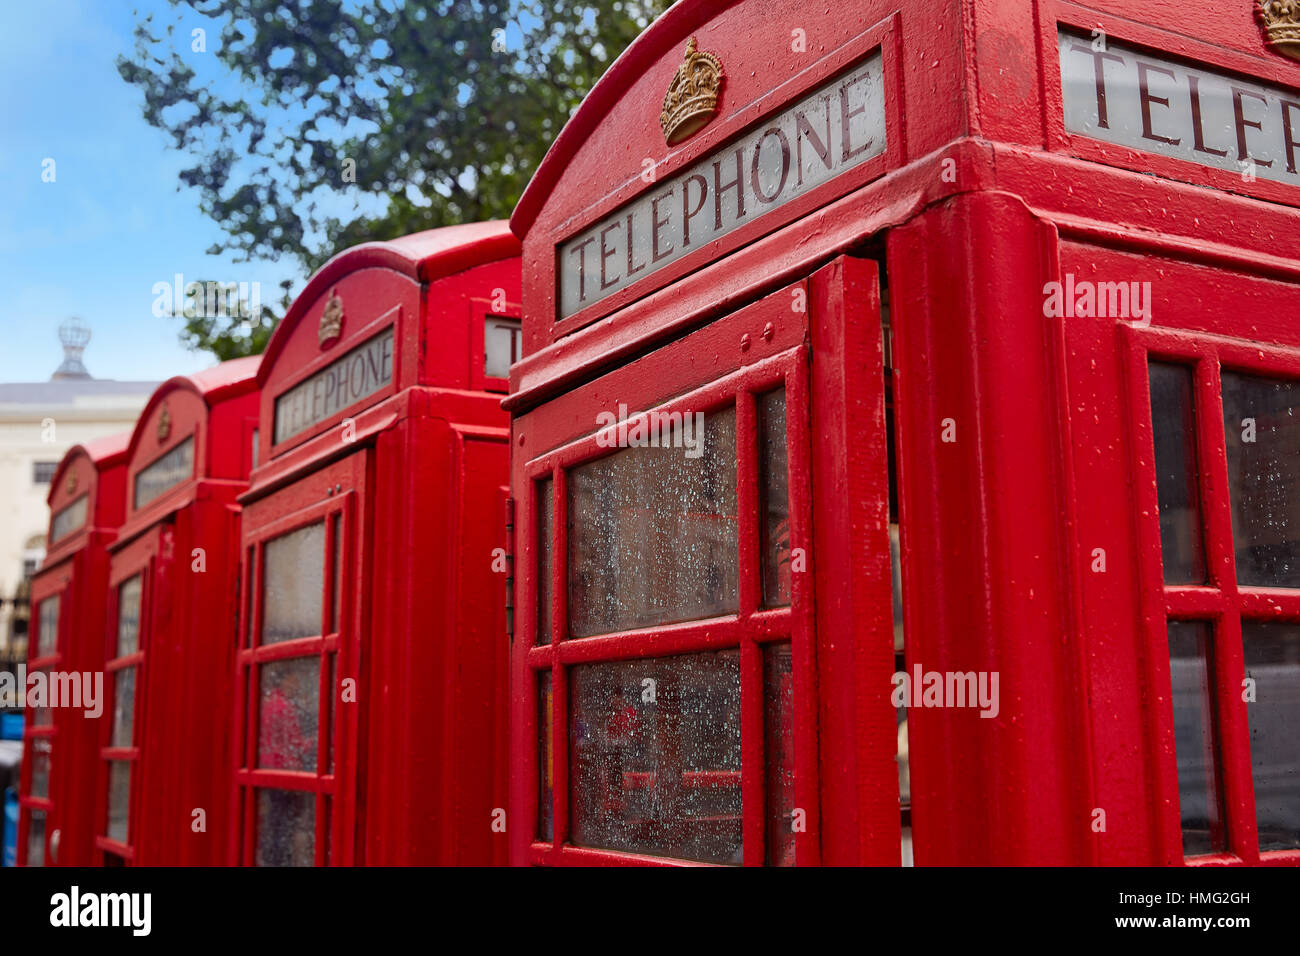 London old red Telephone boxes in a row at England Stock Photo